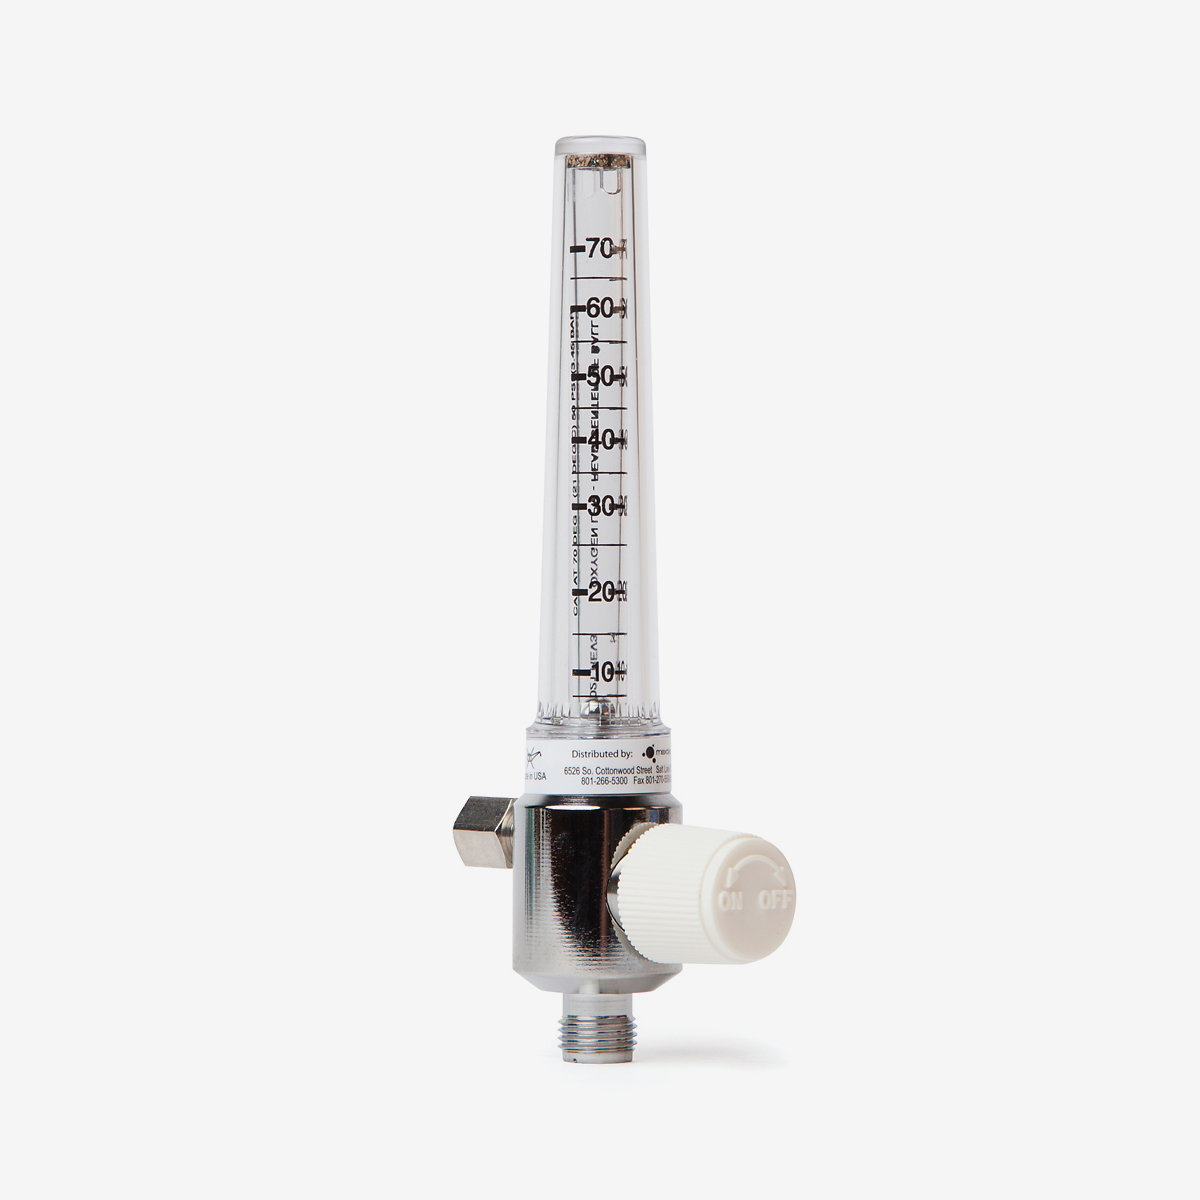 Angled view of 0-70 lpm flow meter with white knob